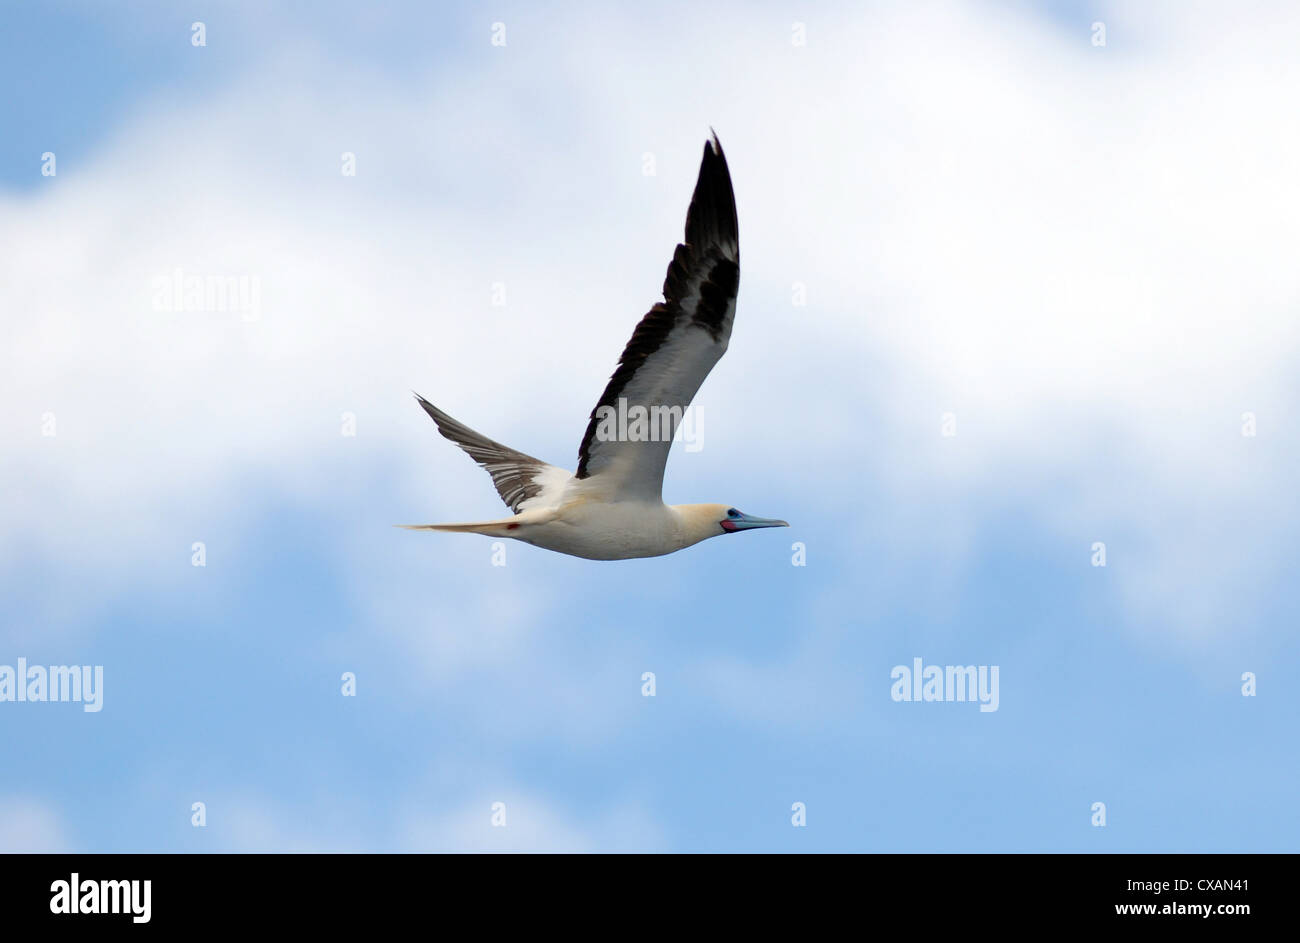 A Red-footed Booby in flight. Latin name Sula sula. Stock Photo